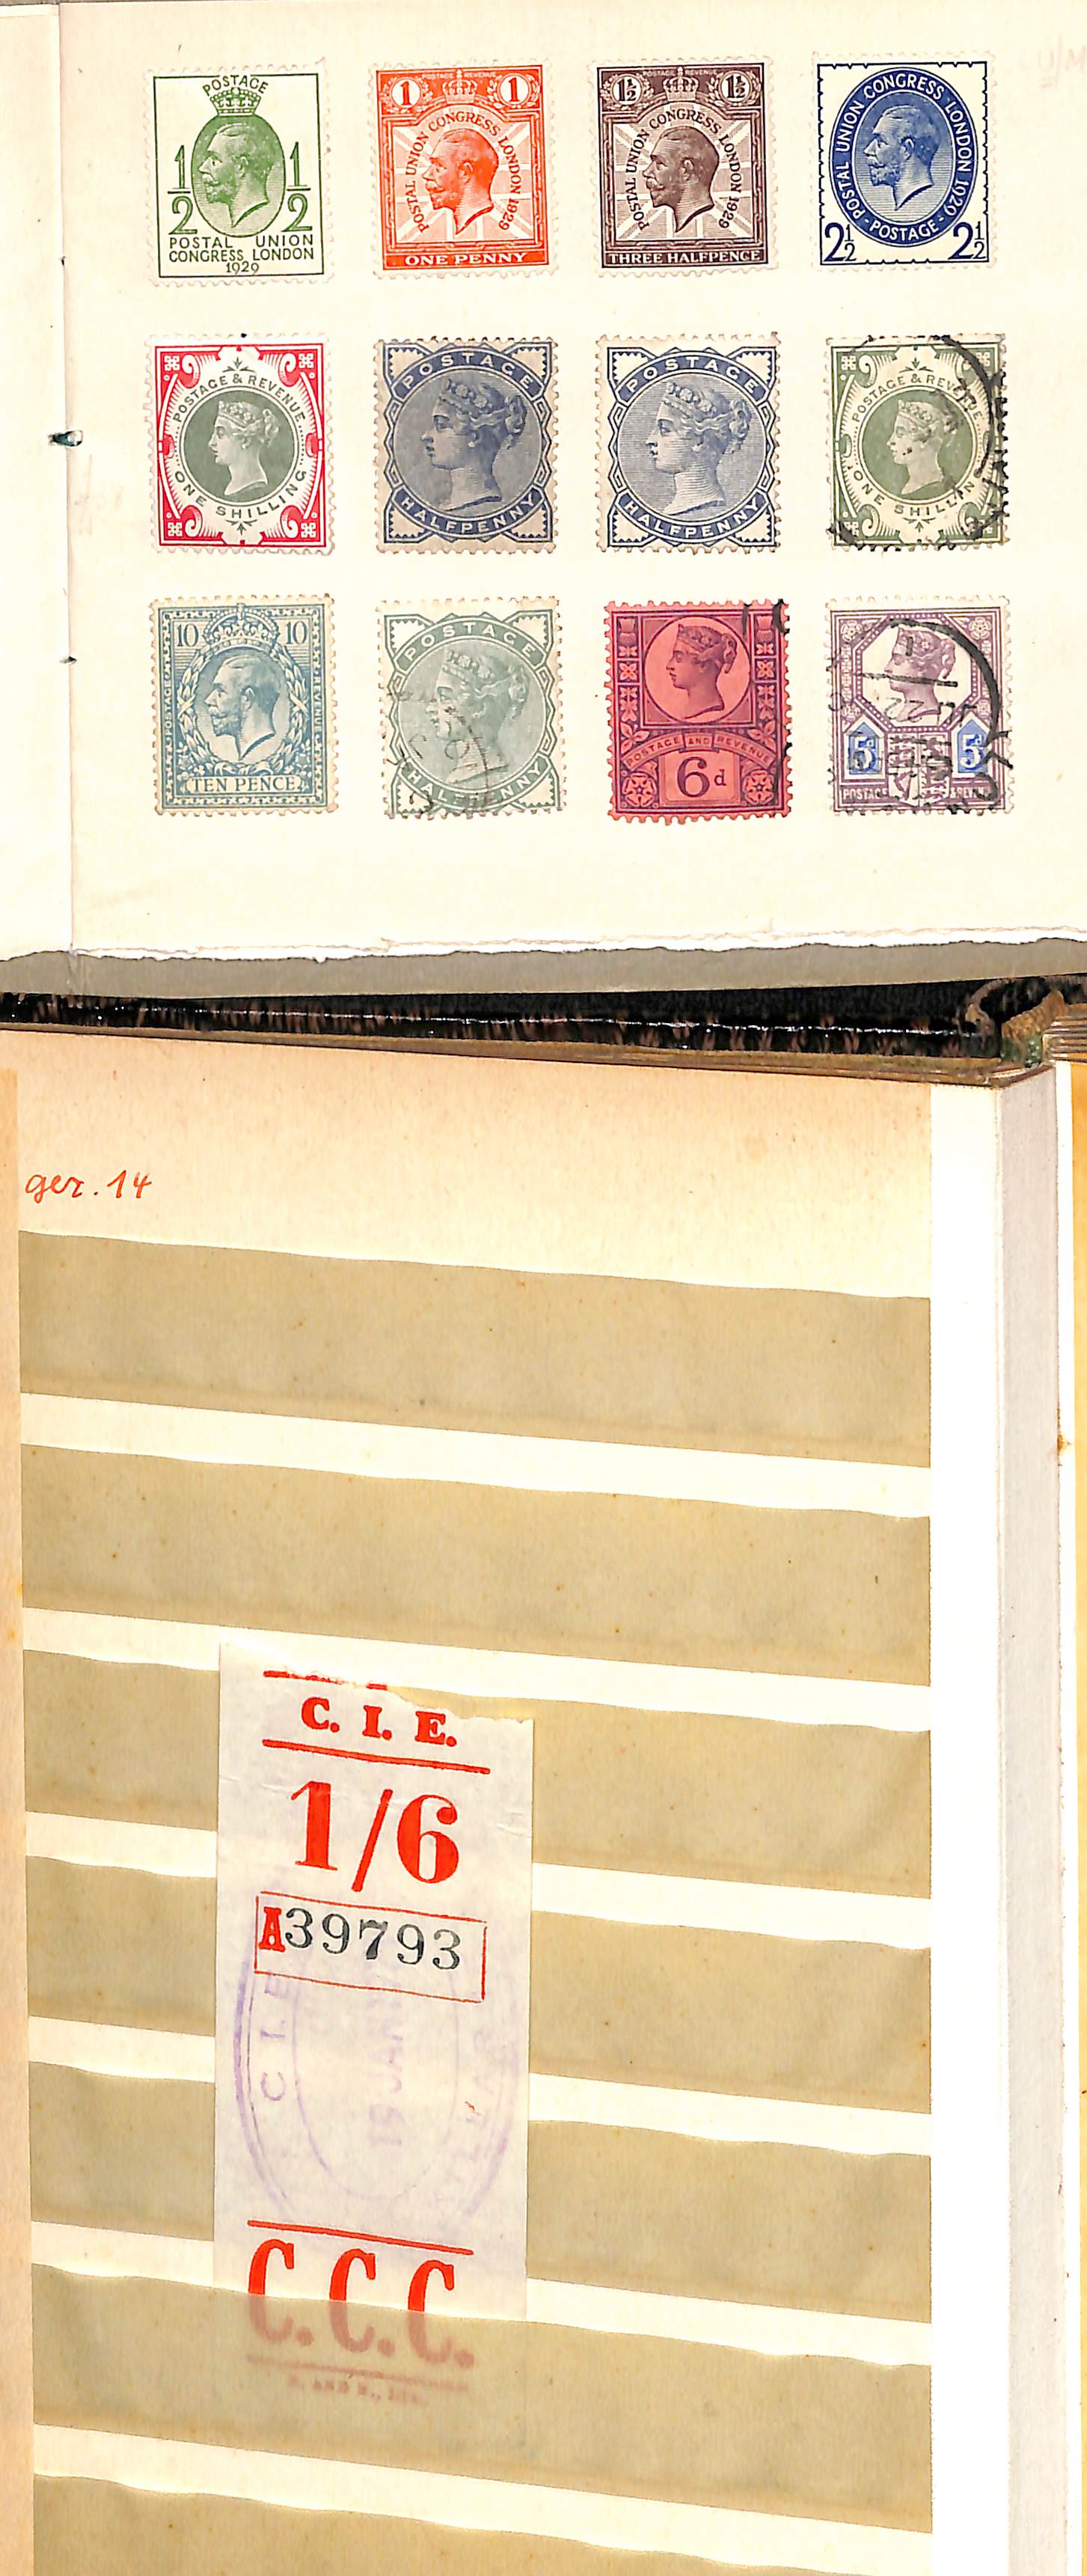 QV-QEII Stamps including 1840 2d and 1891 £1 (both with faults), 1958 3d tete-beche strip, 1969 £1 - Image 9 of 22